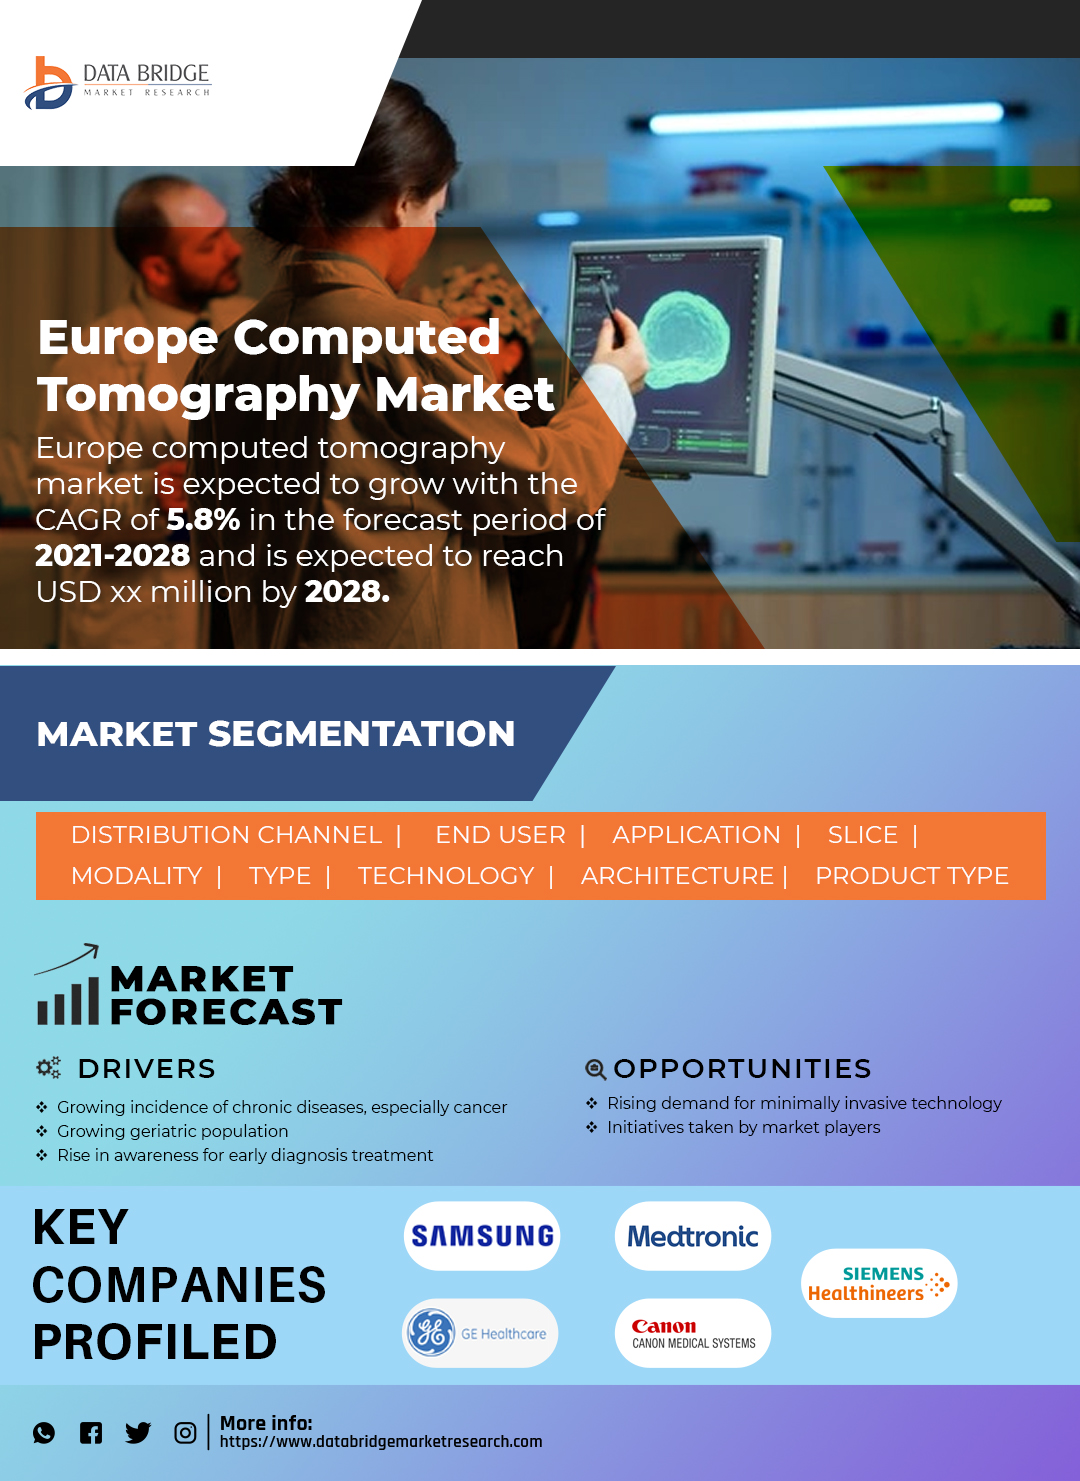 Europe Computed Tomography Devices Market